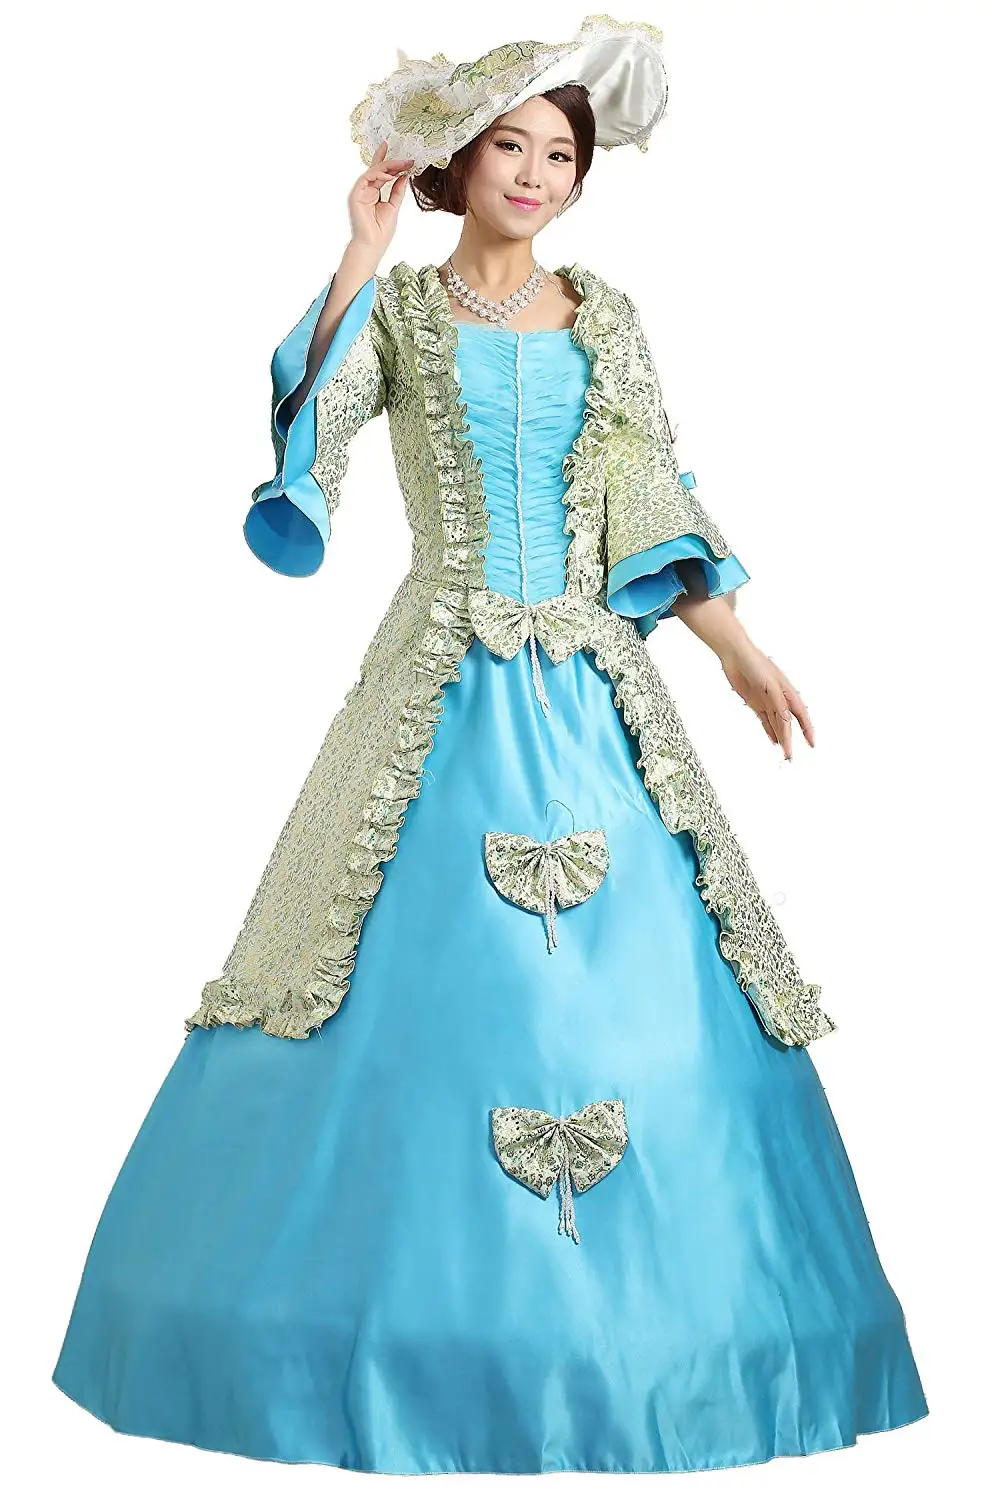 KEMAO 18th Century Dress Medieval Ball Gown Cosplay Victorian Prom Costumes